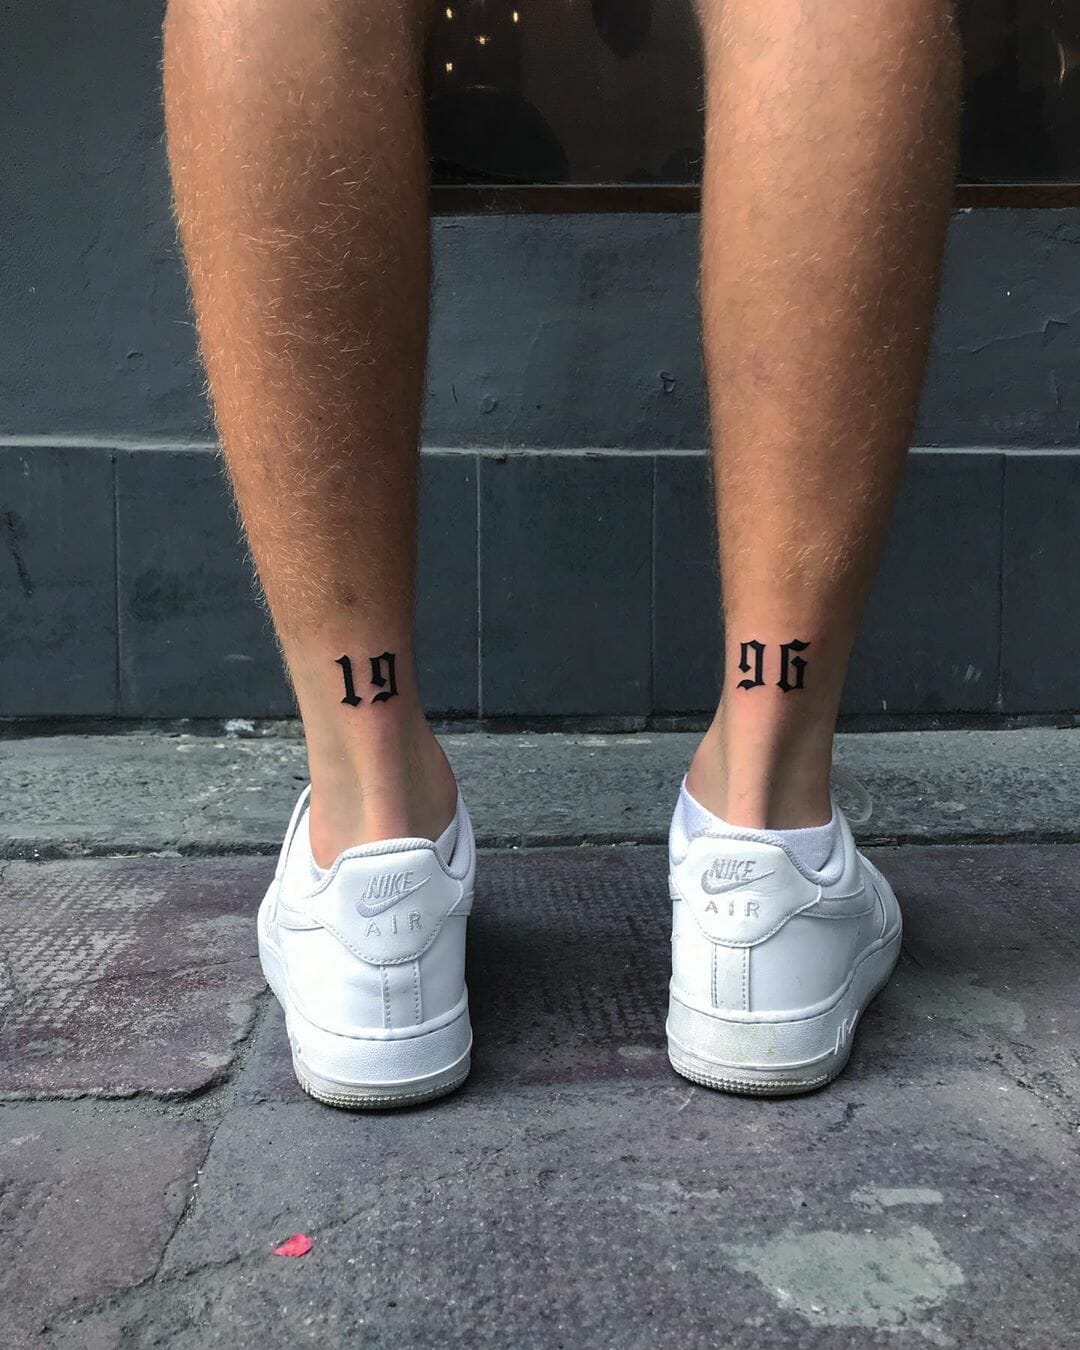 101 Amazing Number Tattoo Ideas To Inspire You In 2023! - Outsons